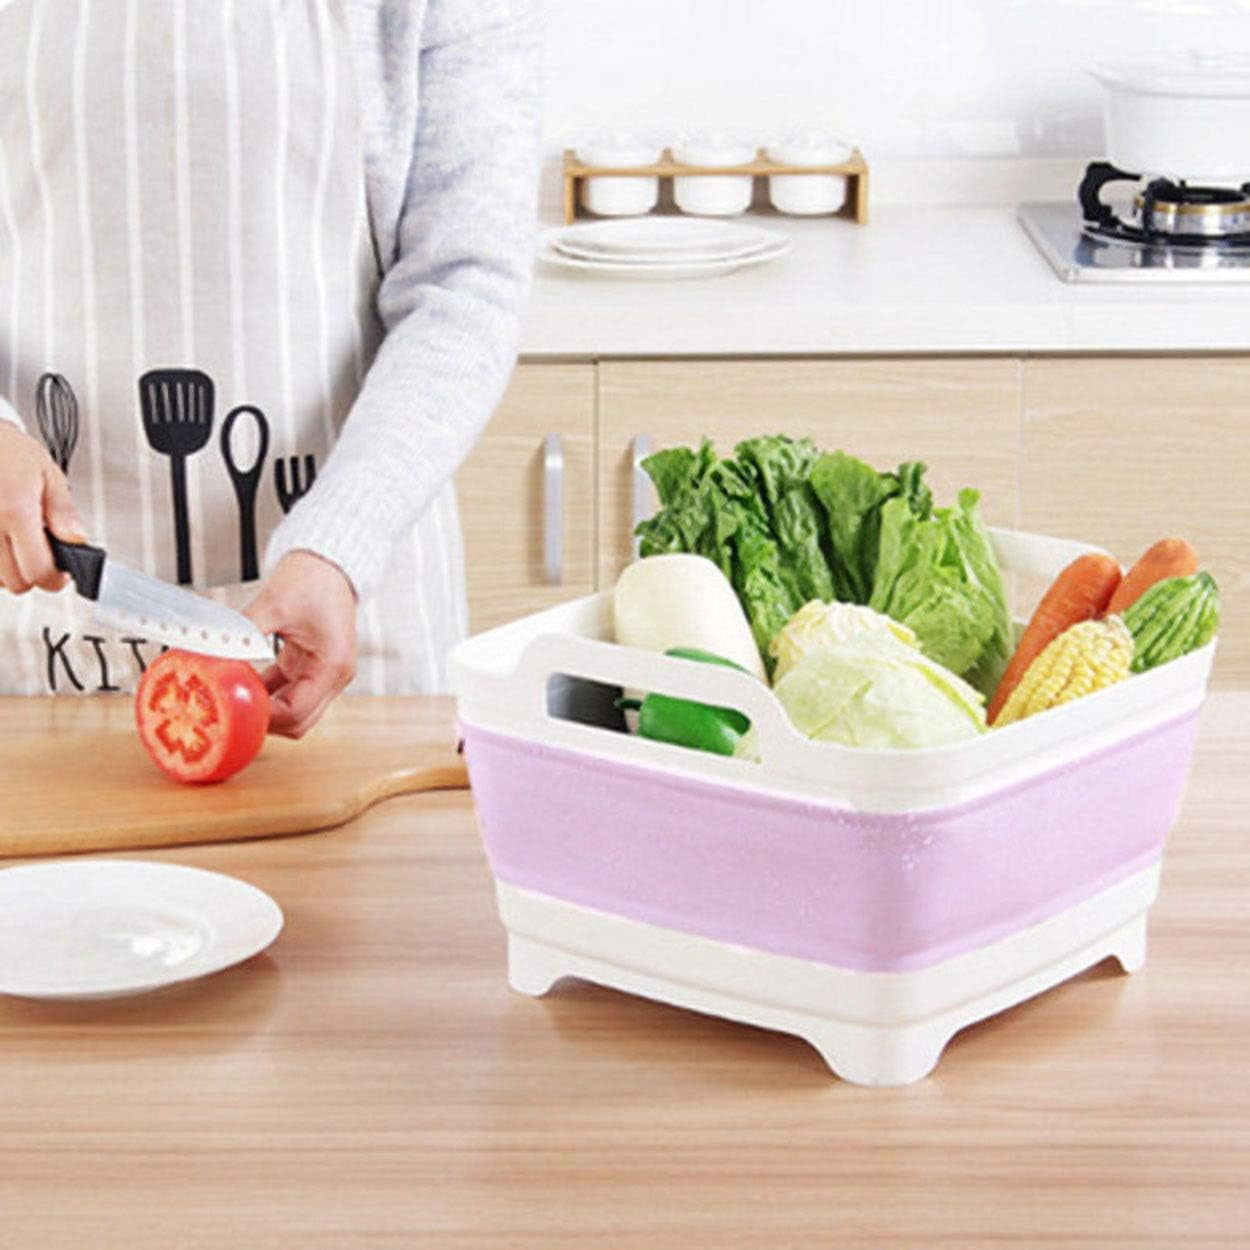 gvtocld Dish Drying Rack Collapsible Space Saving Dinnerware Drainer Organizer Foldable Portable Tableware Storage Rack Washable Reusable Cutlery Organizer